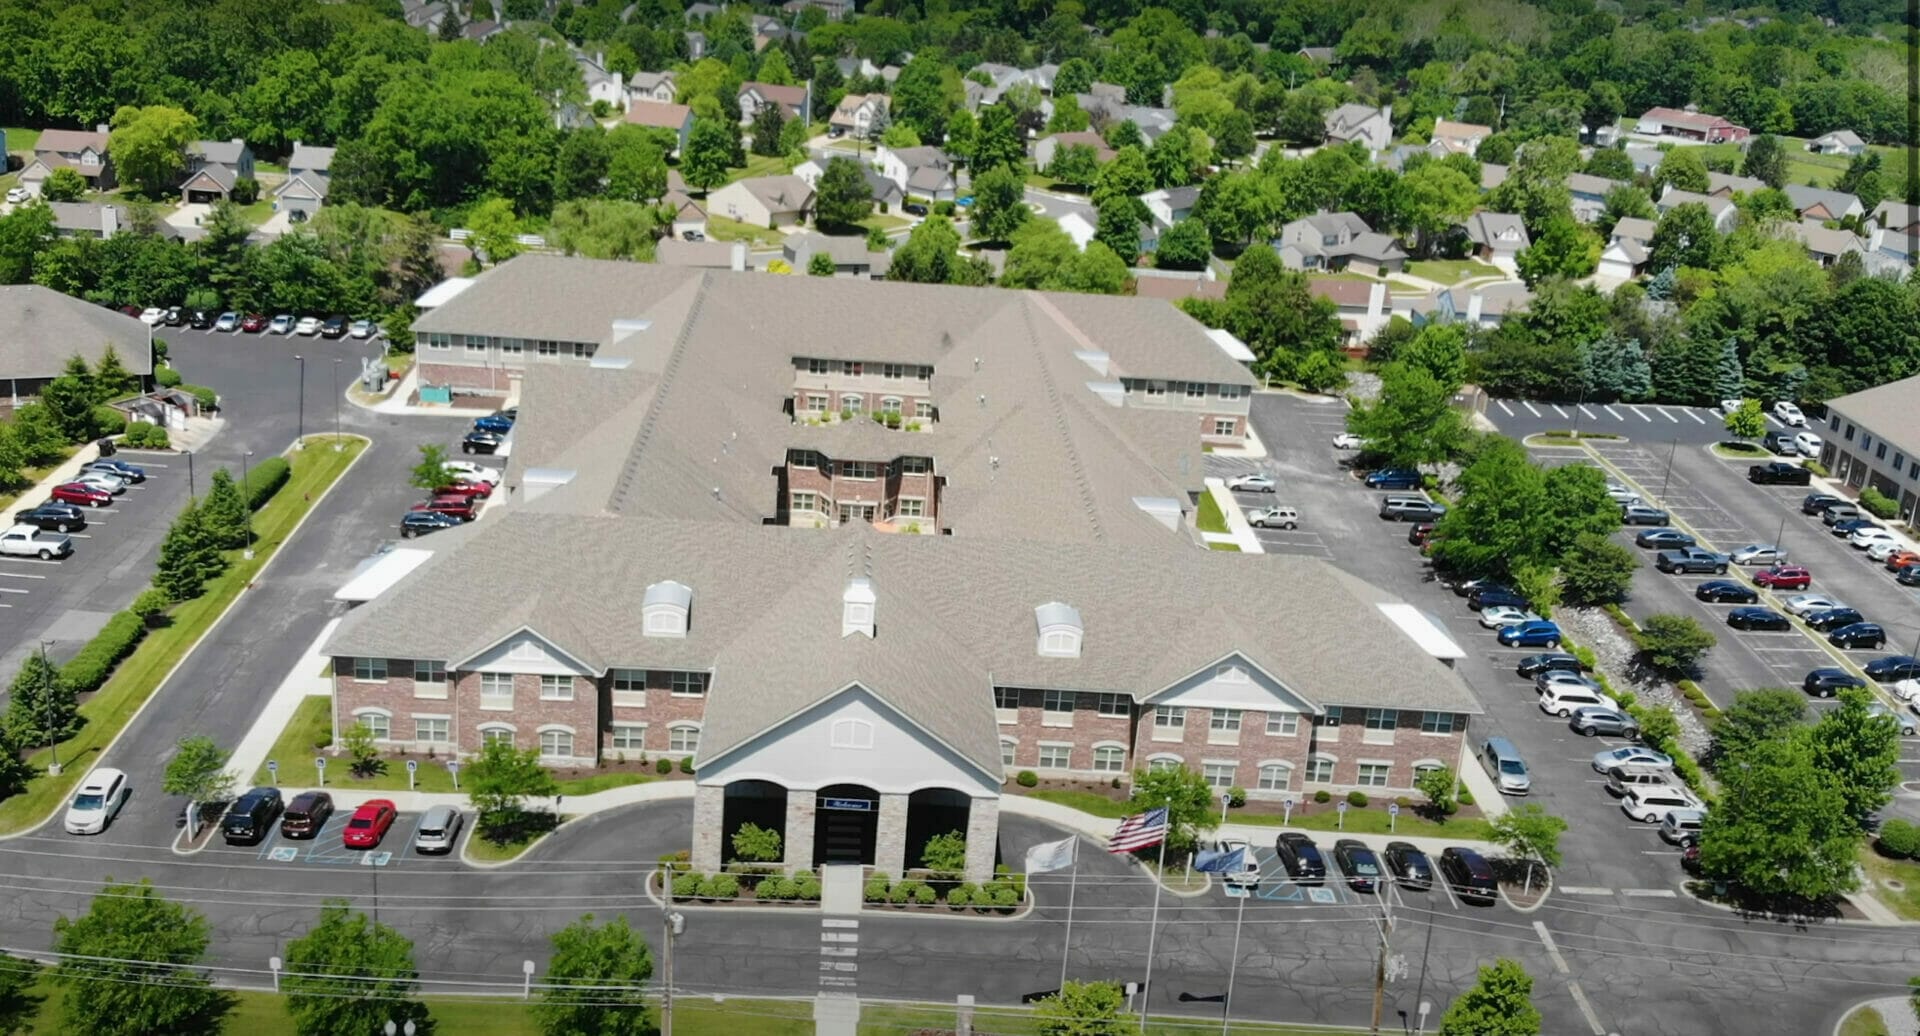 Allisonville Meadows Assisted Living Building Aerial View